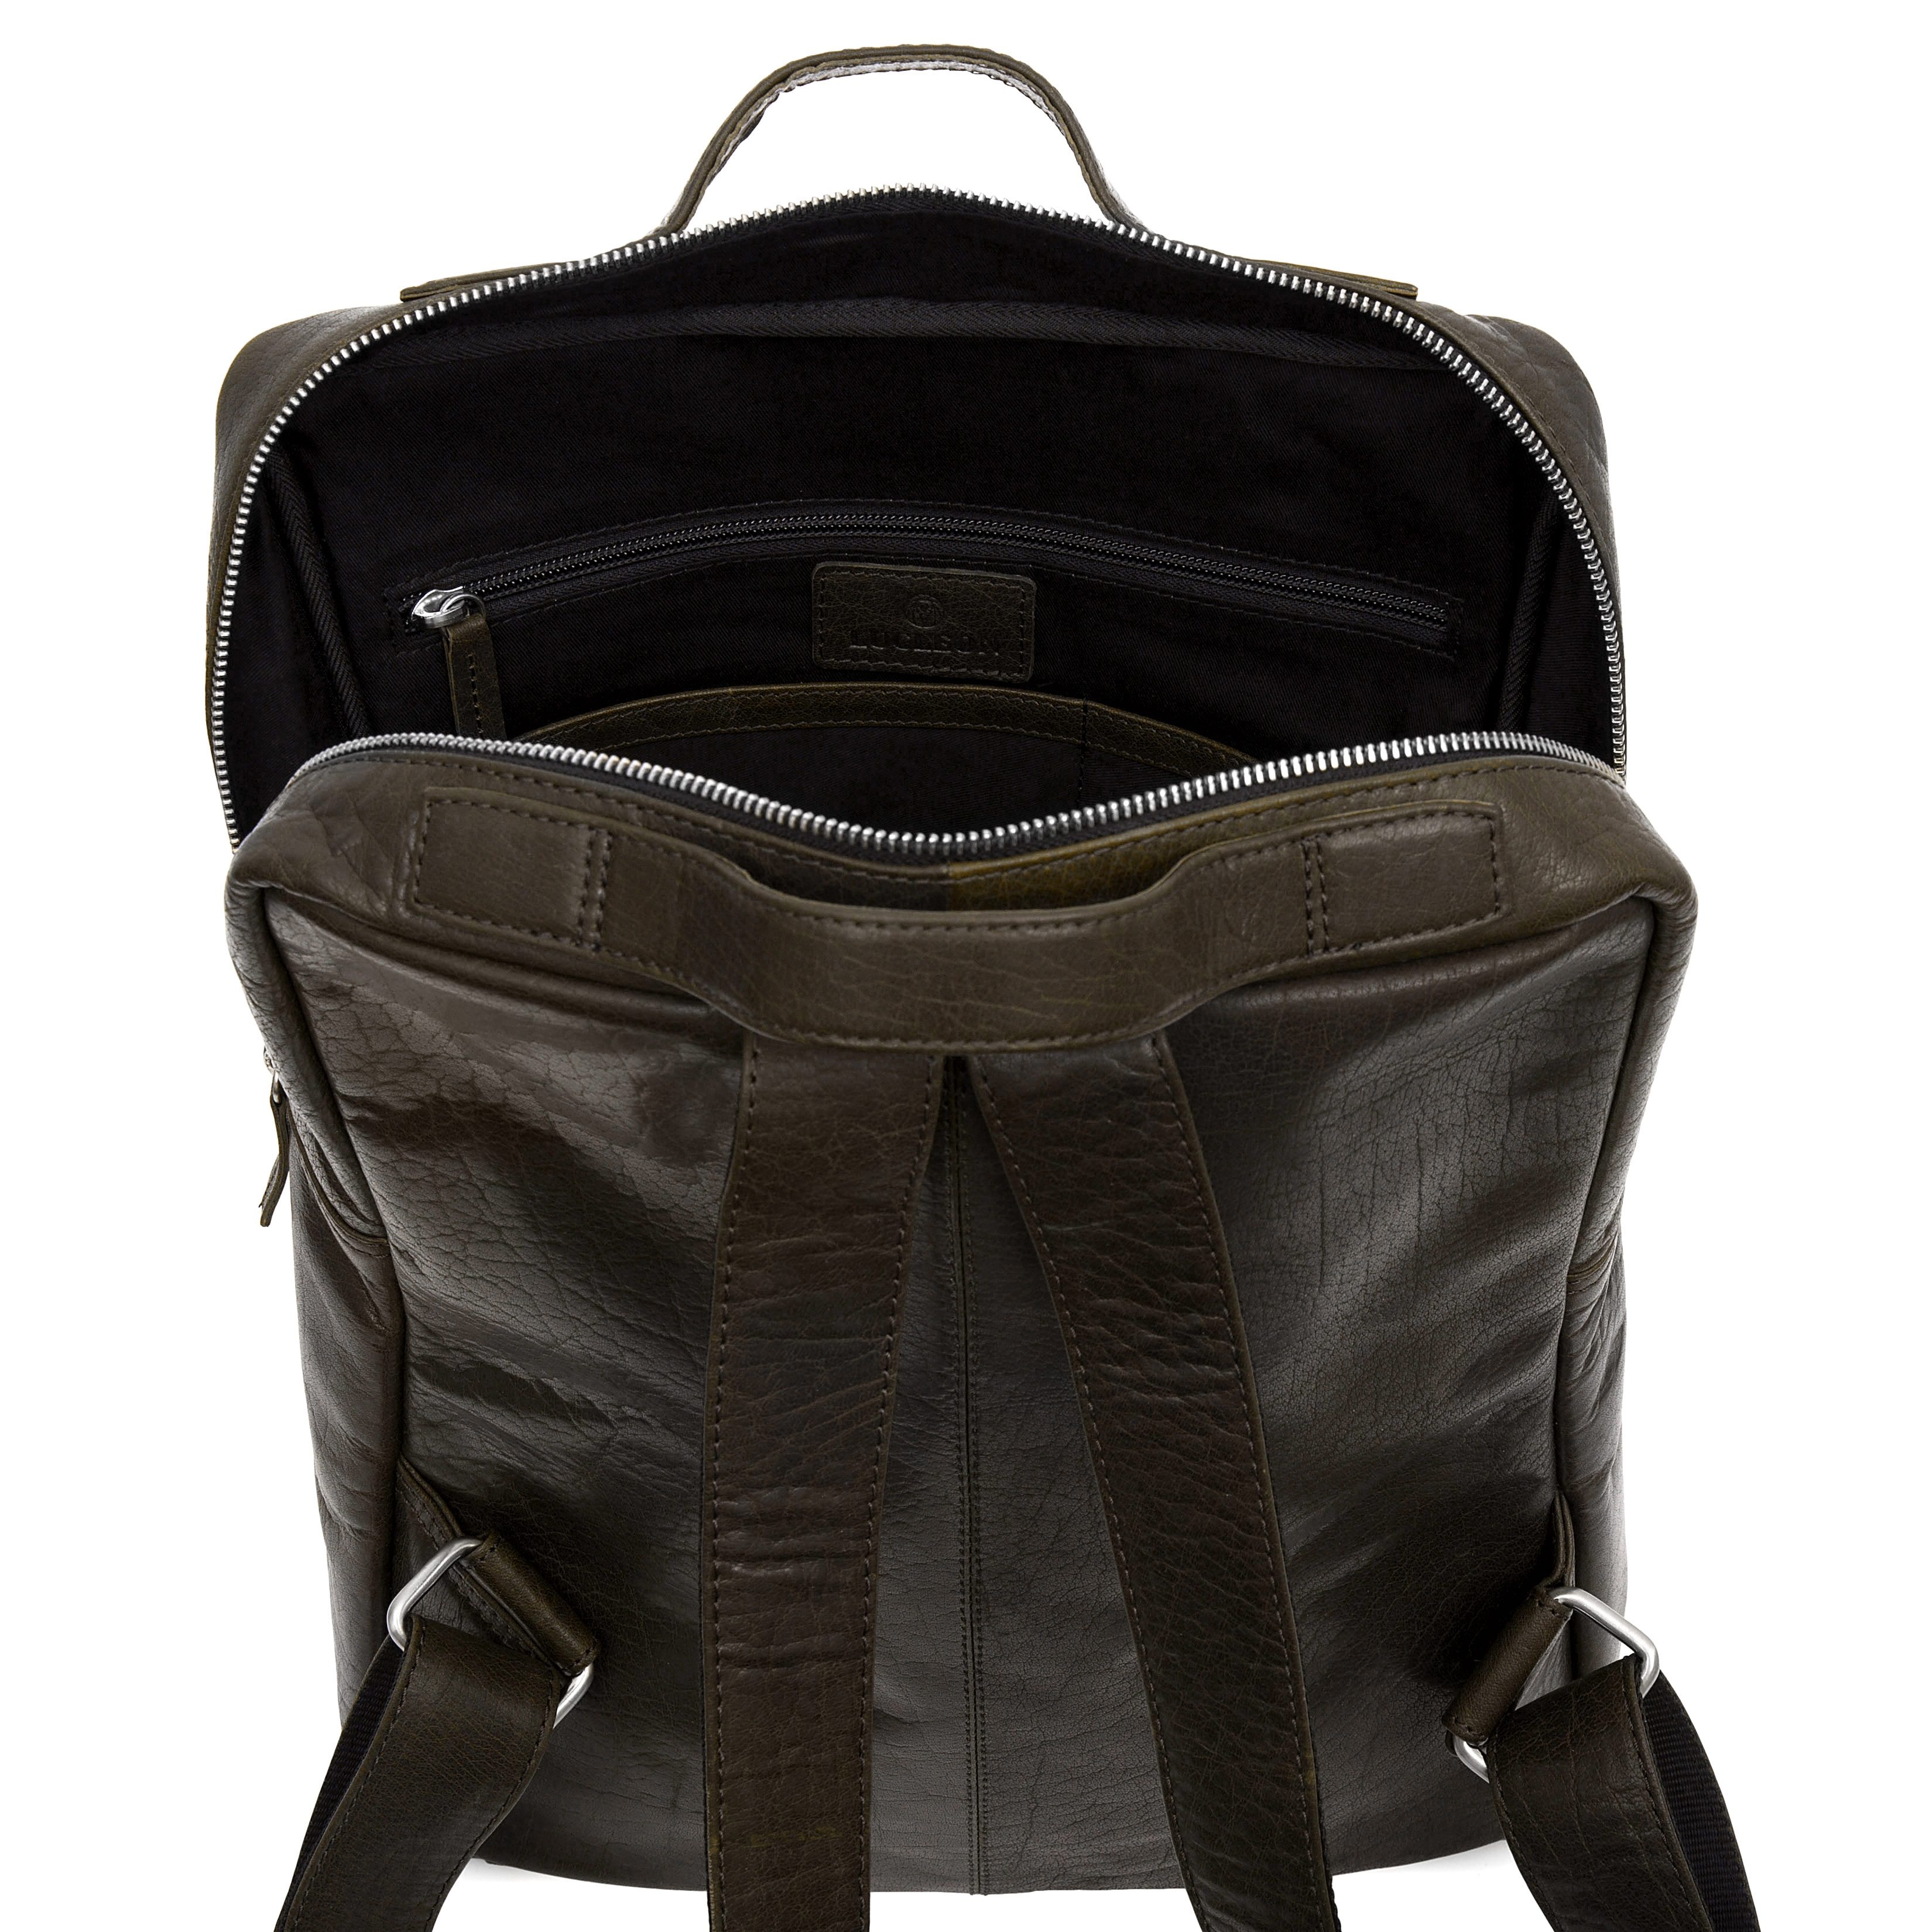 Montreal Retro Black Leather Backpack, In stock!